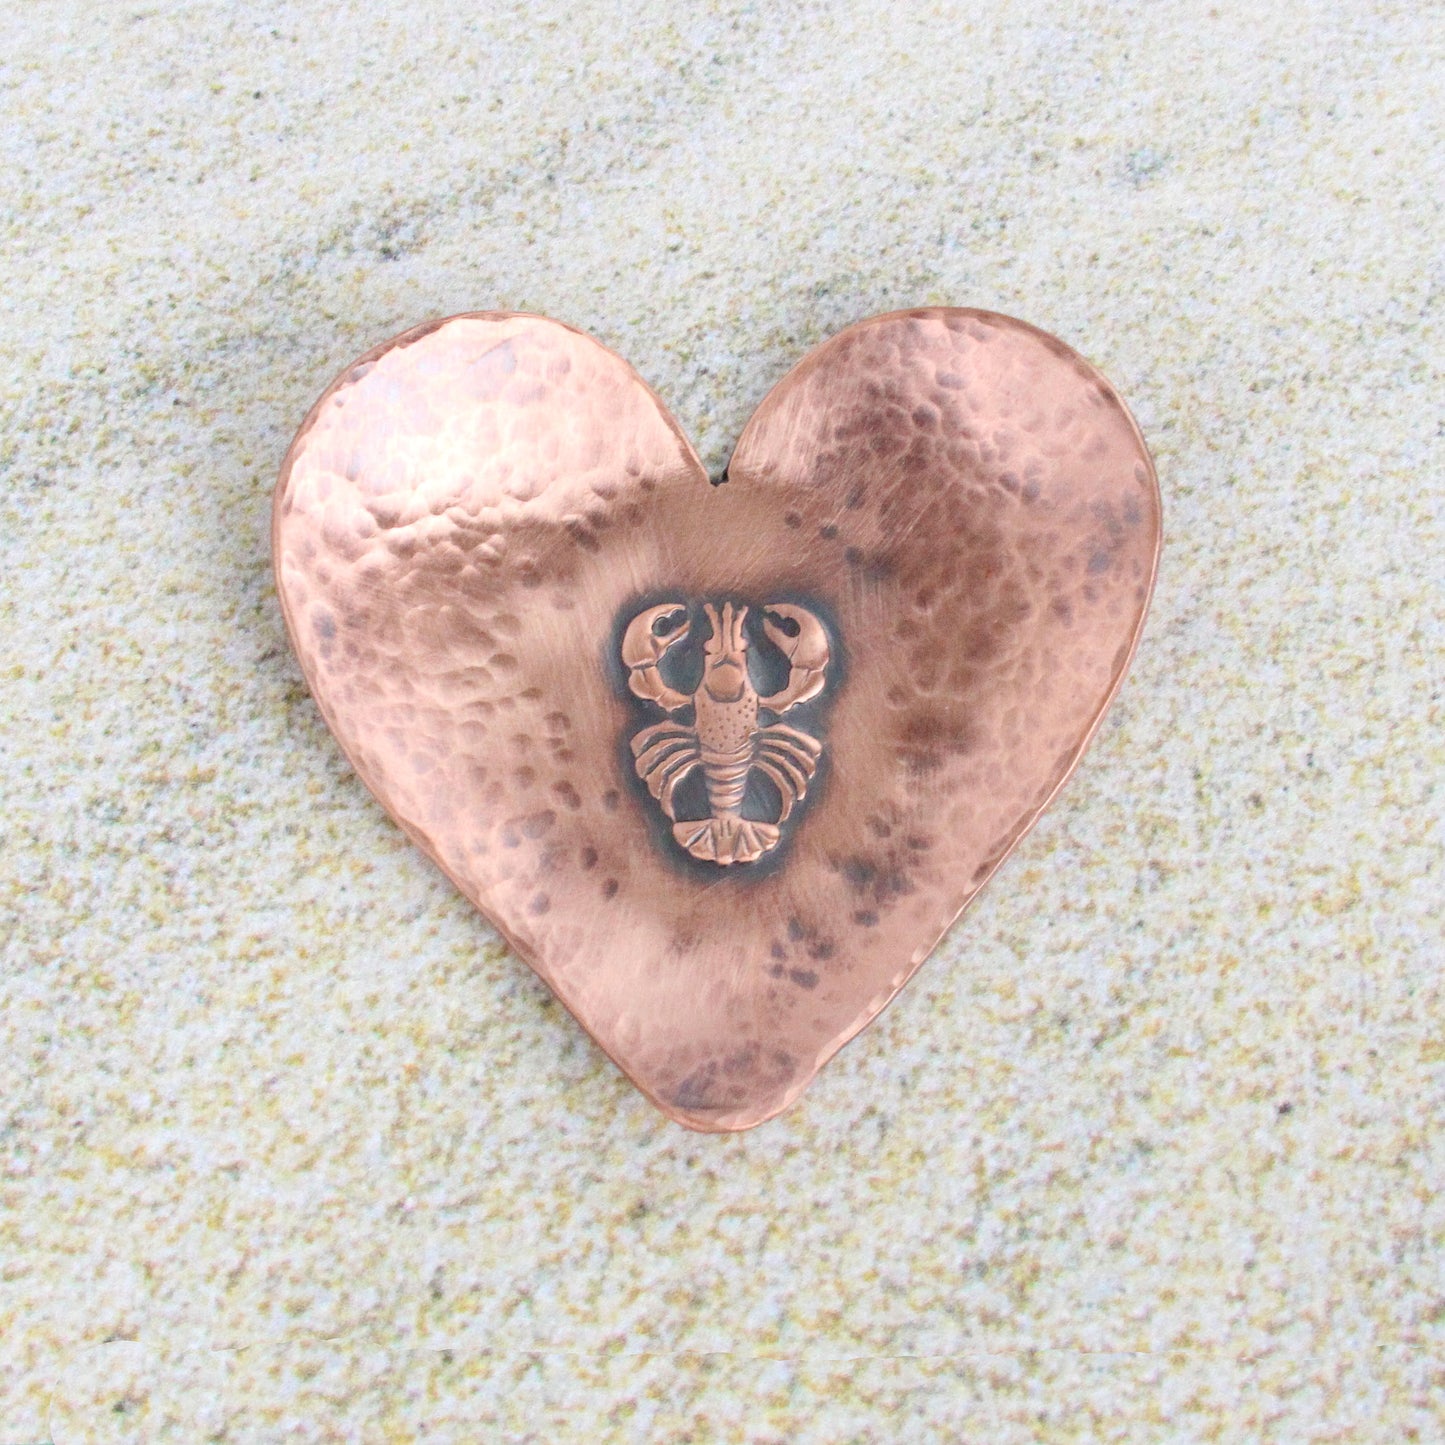 A small 2 inch heart shaped copper ring or trinket dish. There is a raised detailed impression of a lobster in the middle and hammered texture around the edge. The bottom is flat and the three points of the heart are gently curved up. The bowl is oxidized to enhance the details of the lobster and the hammer marks.